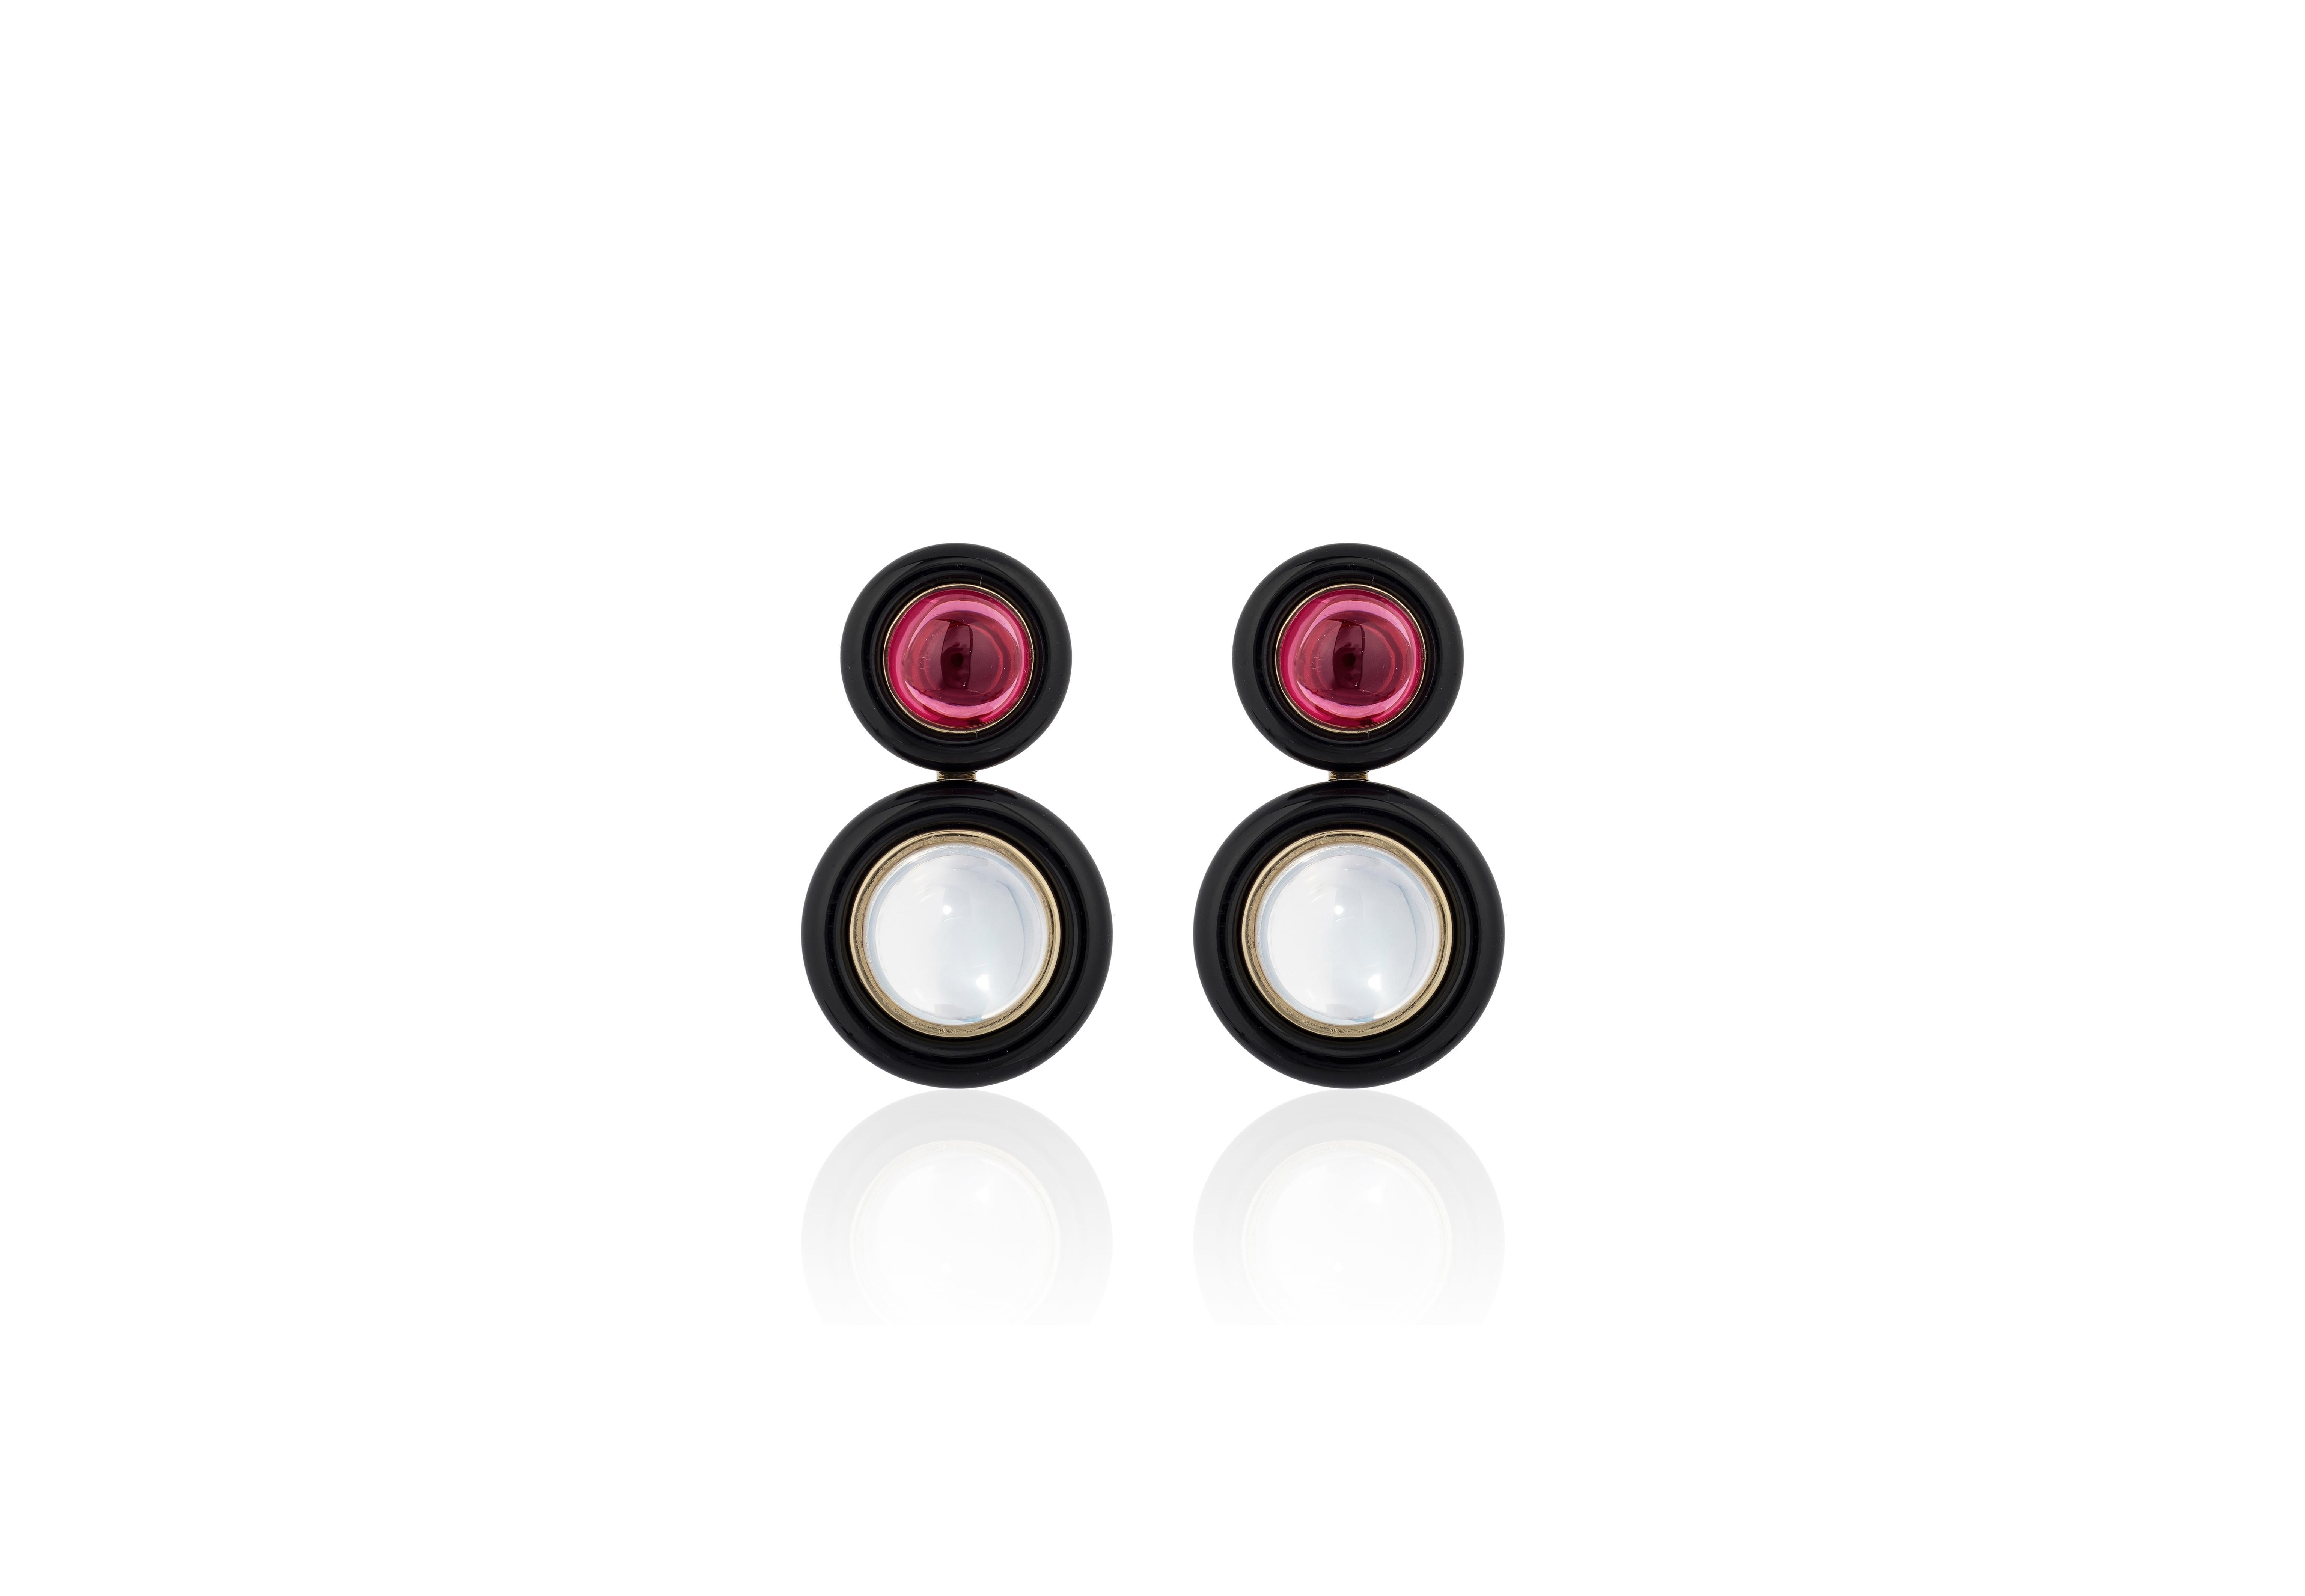 Garnet and Moon Quartz Cabochon Earrings with Onyx ring Surround in 18K Yellow Gold, from 'Limited Edition' Collection. These limited edition items are just that! Limited! 

Feel the exclusiveness in every piece from this collection and Feel the